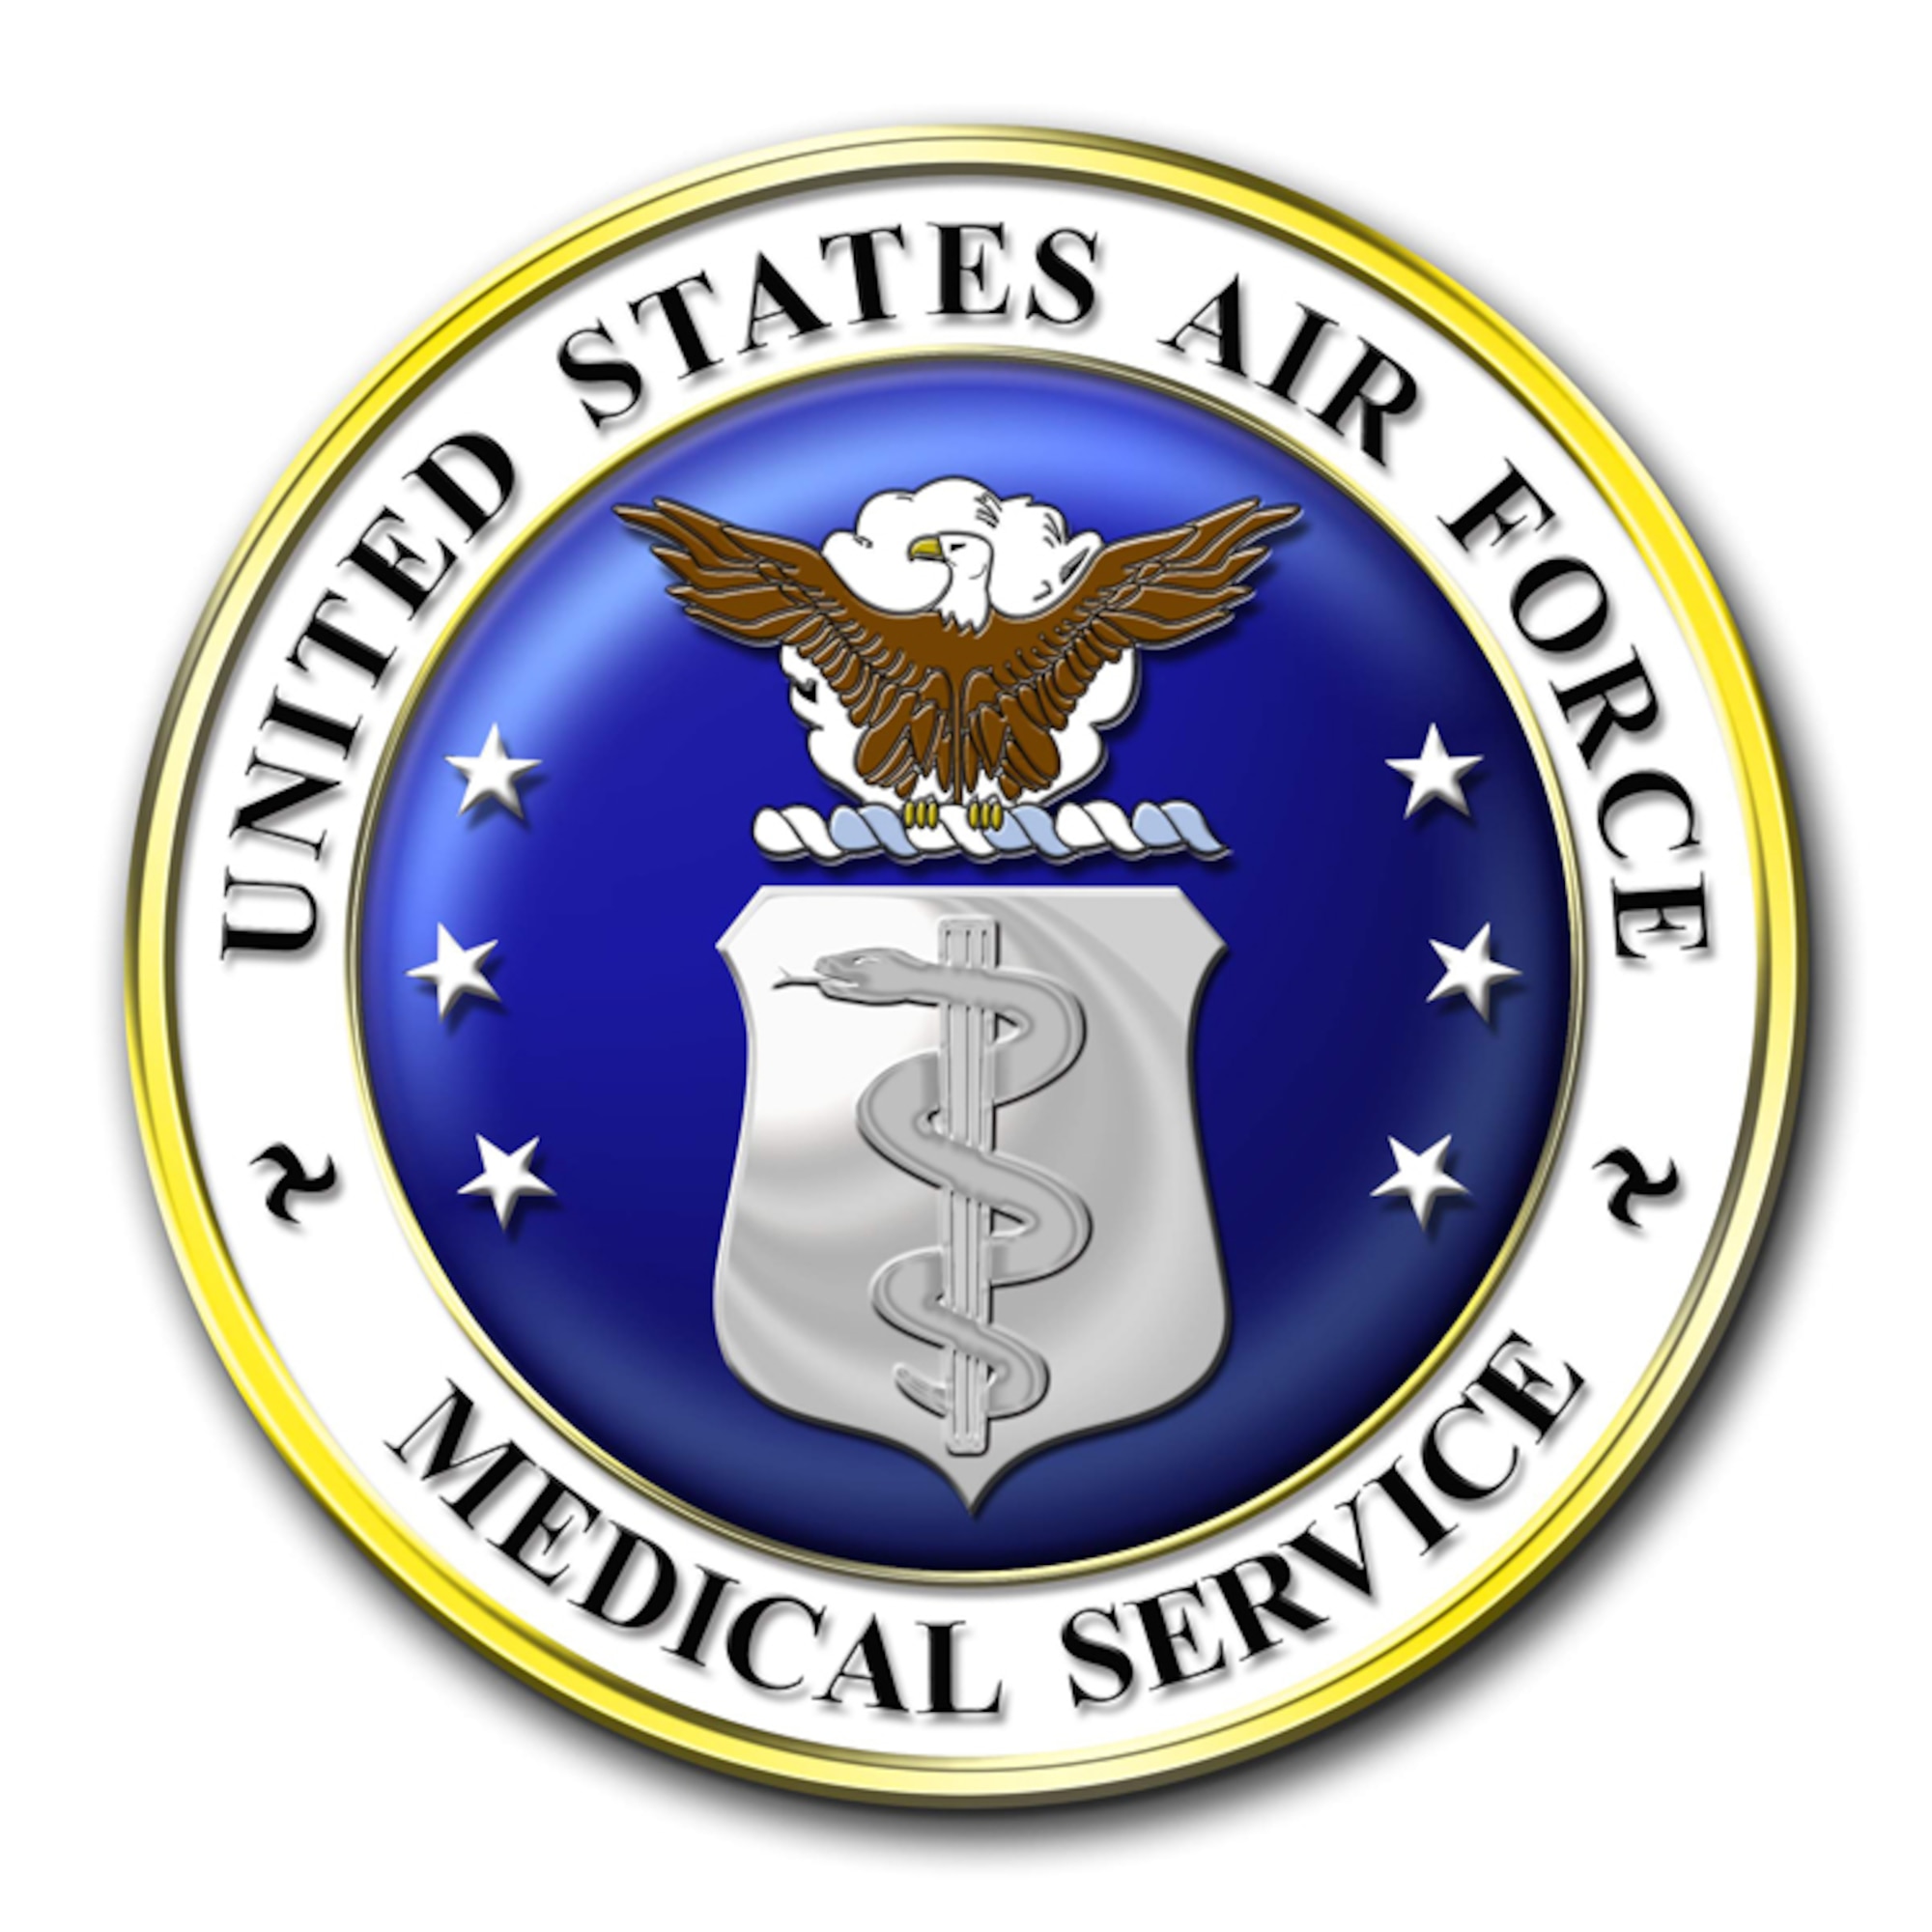 army med service insignia